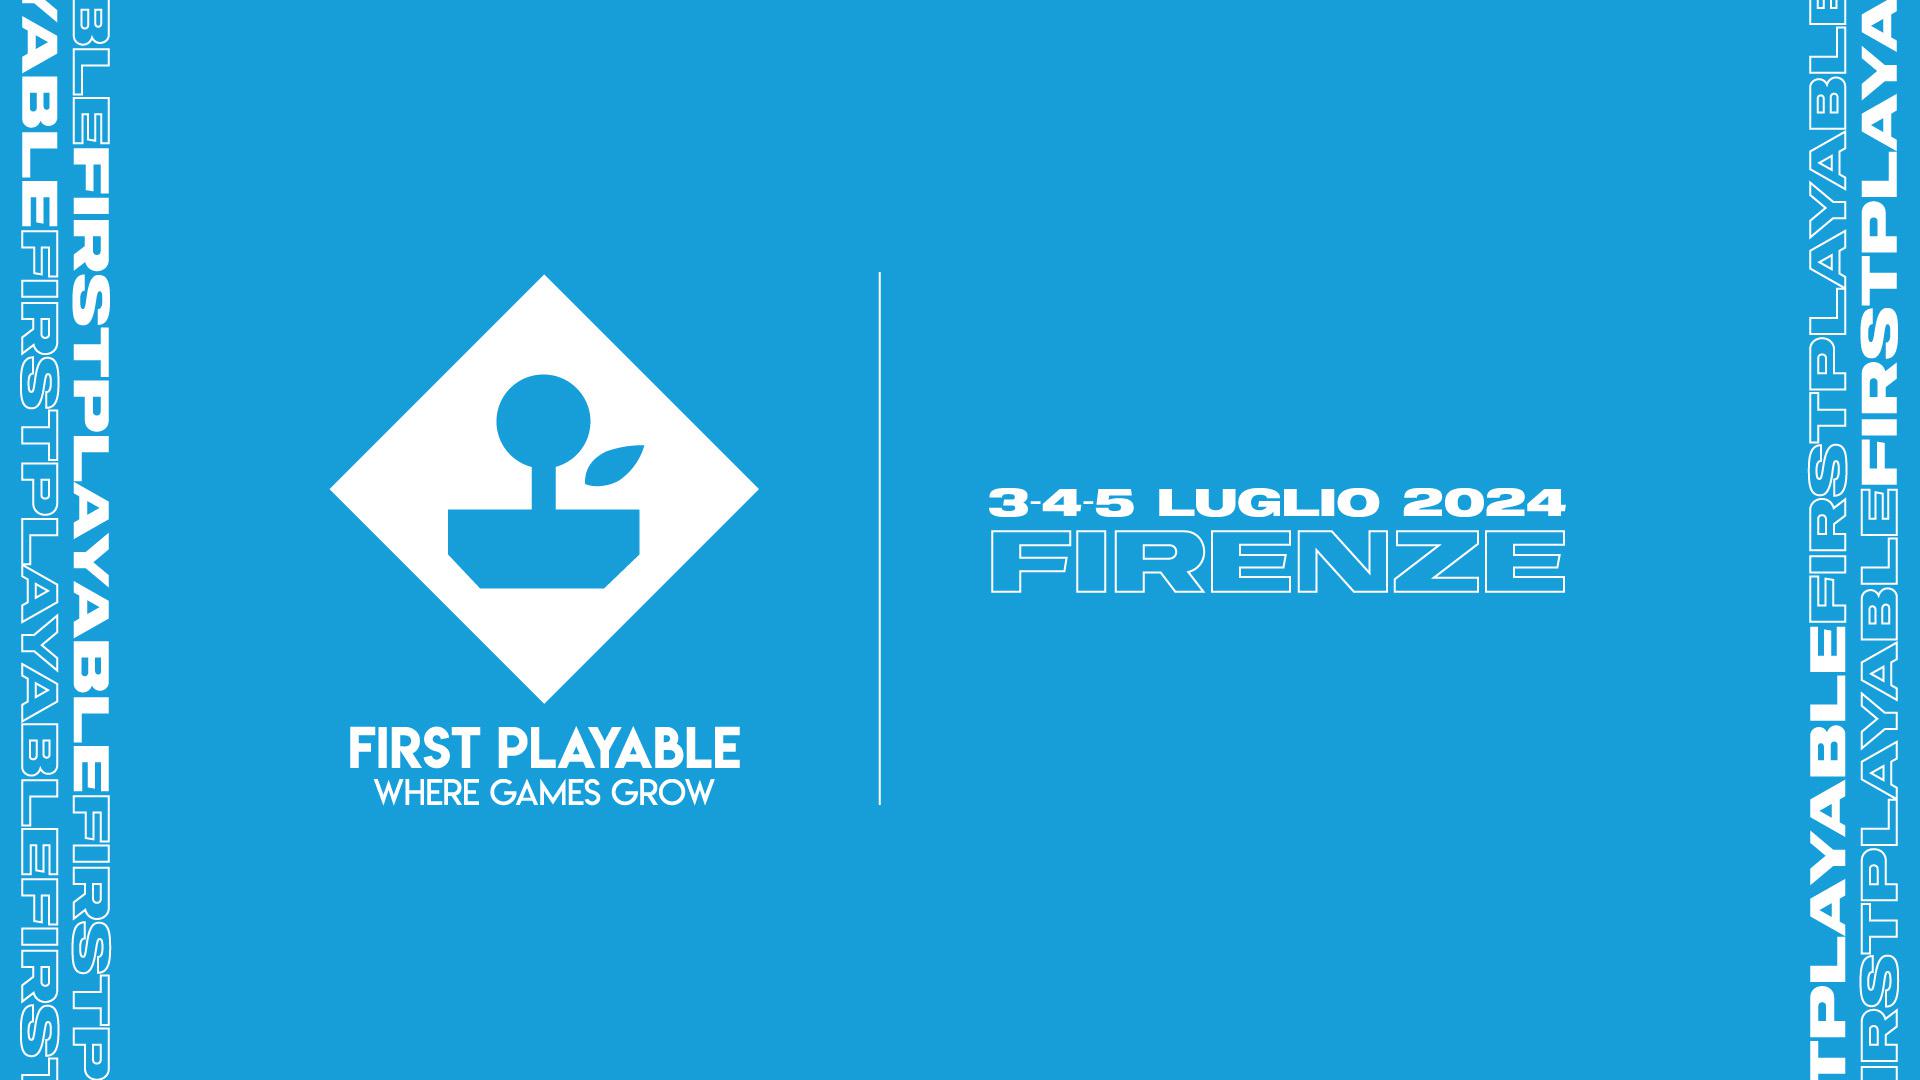 The Italian video game sector gathers in Florence